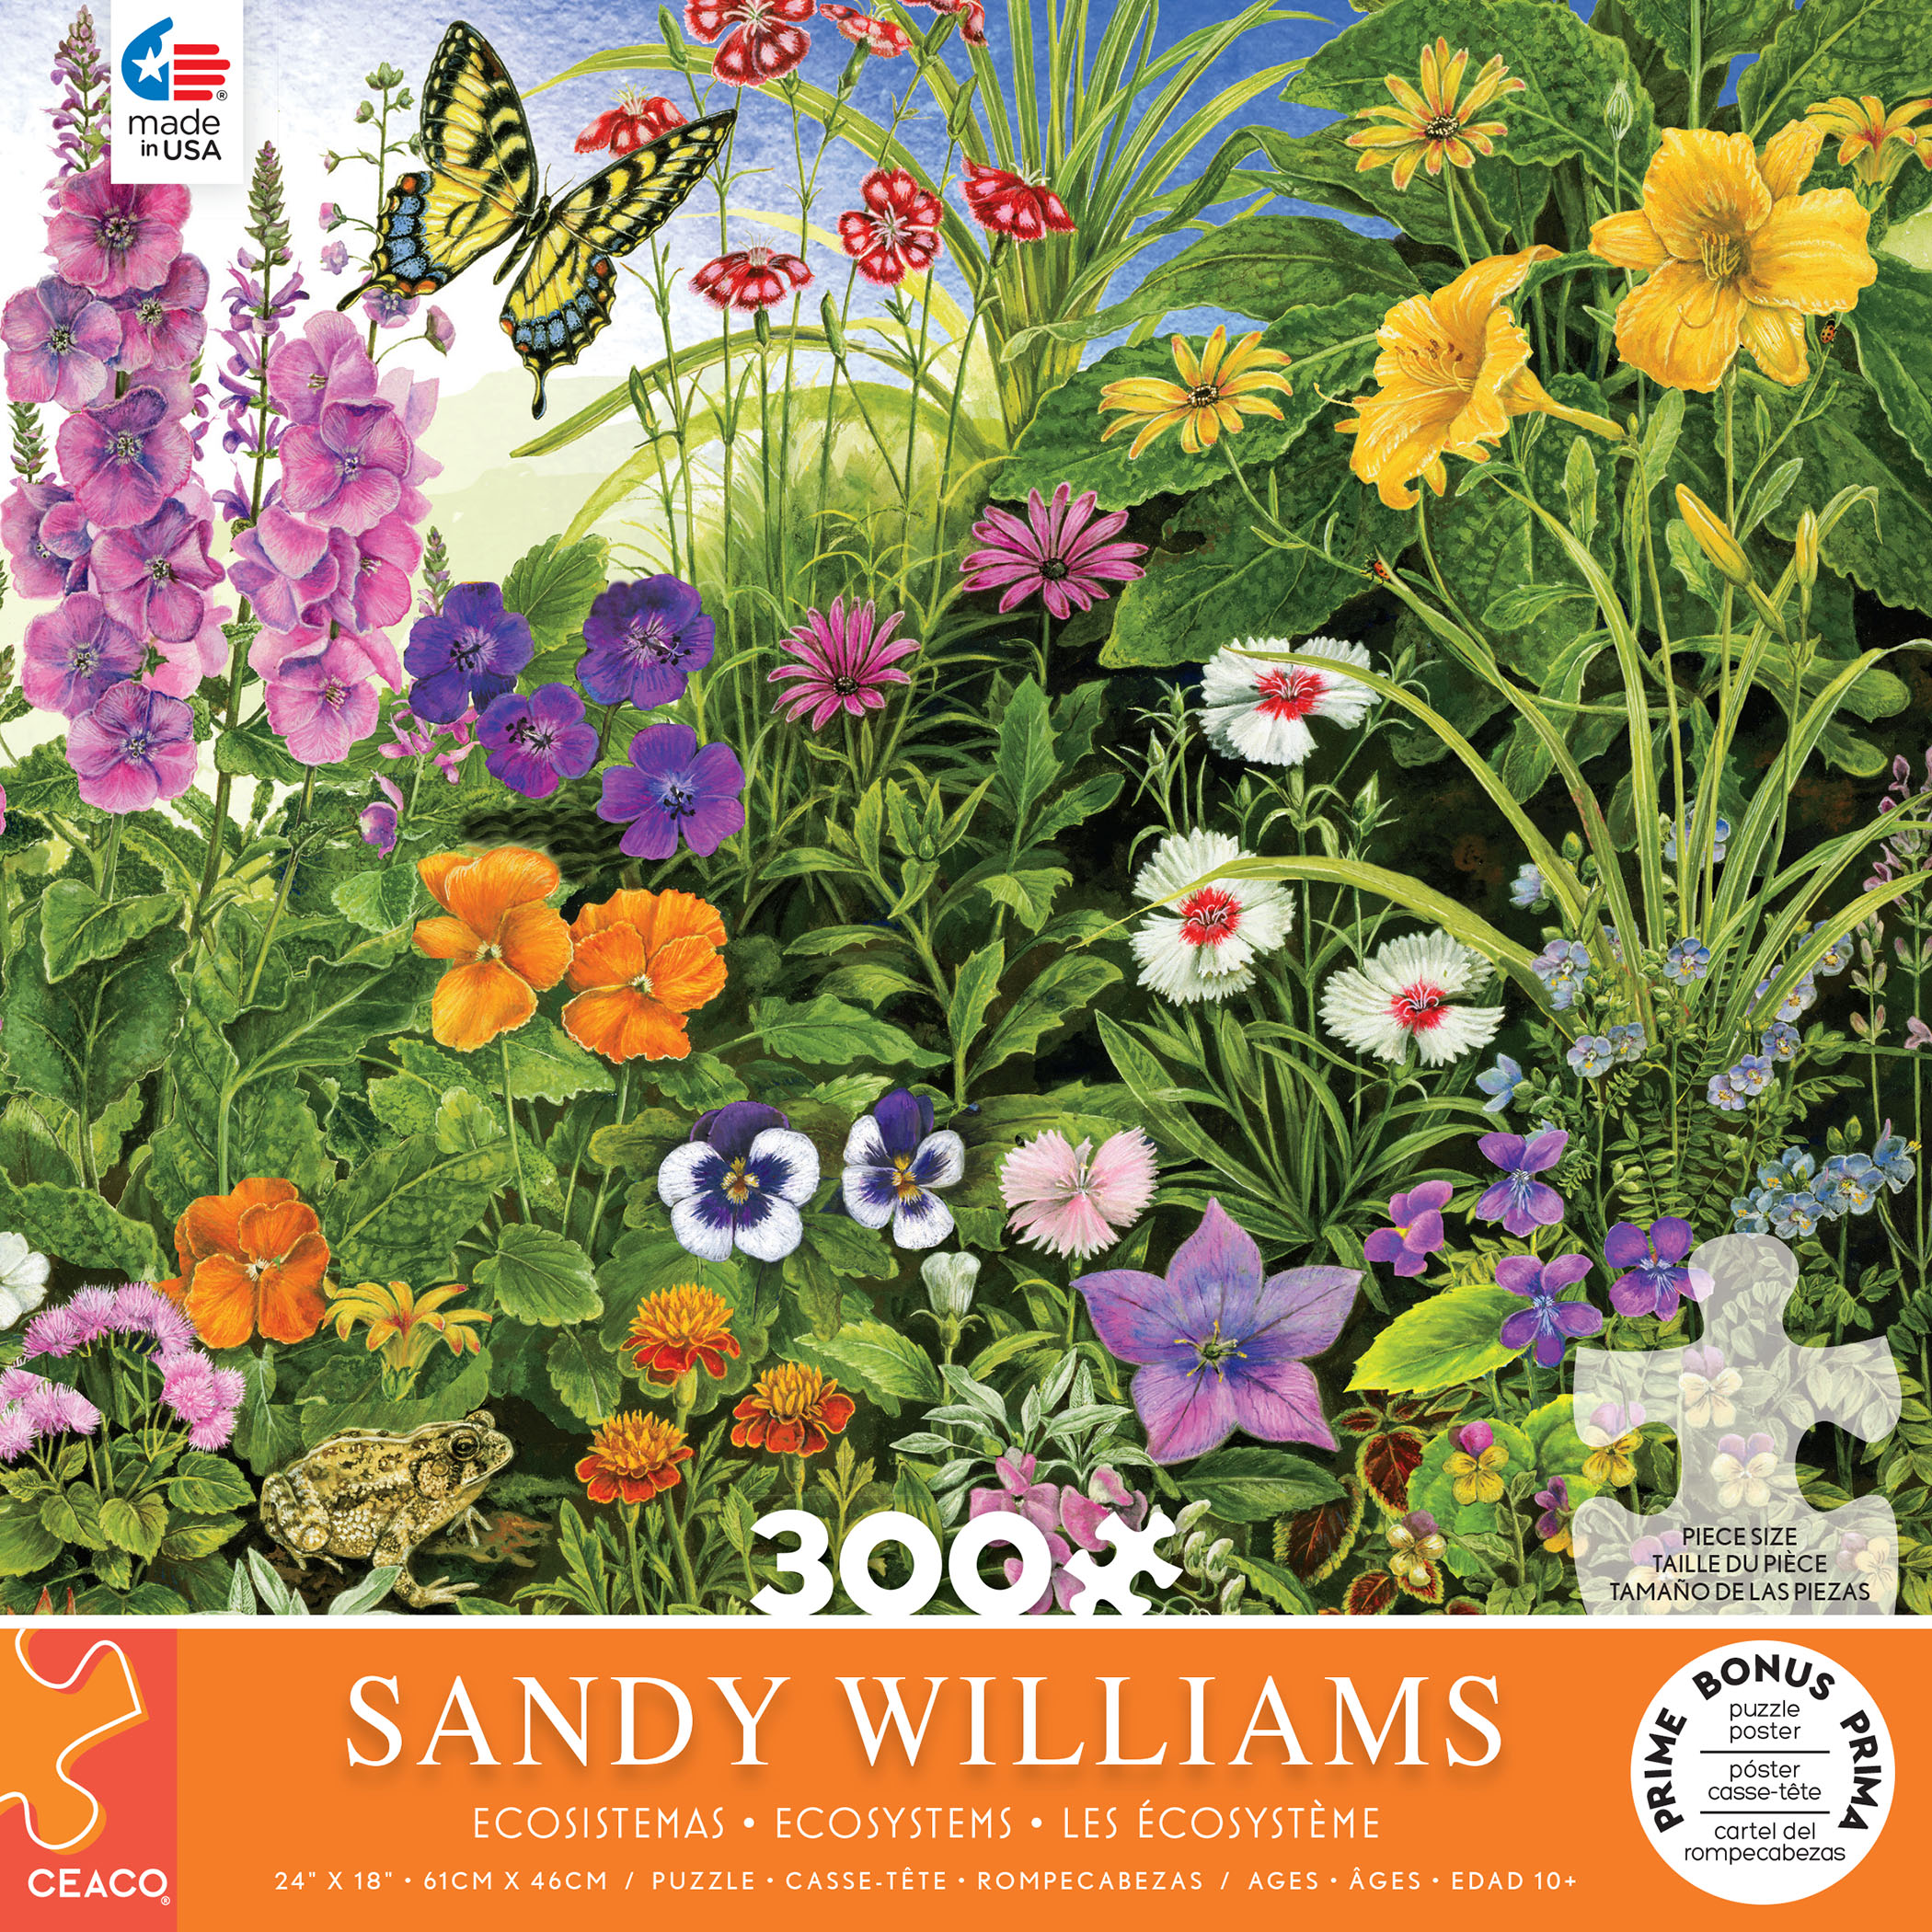 In the Garden by Sandy Williams - Scratch and Dent